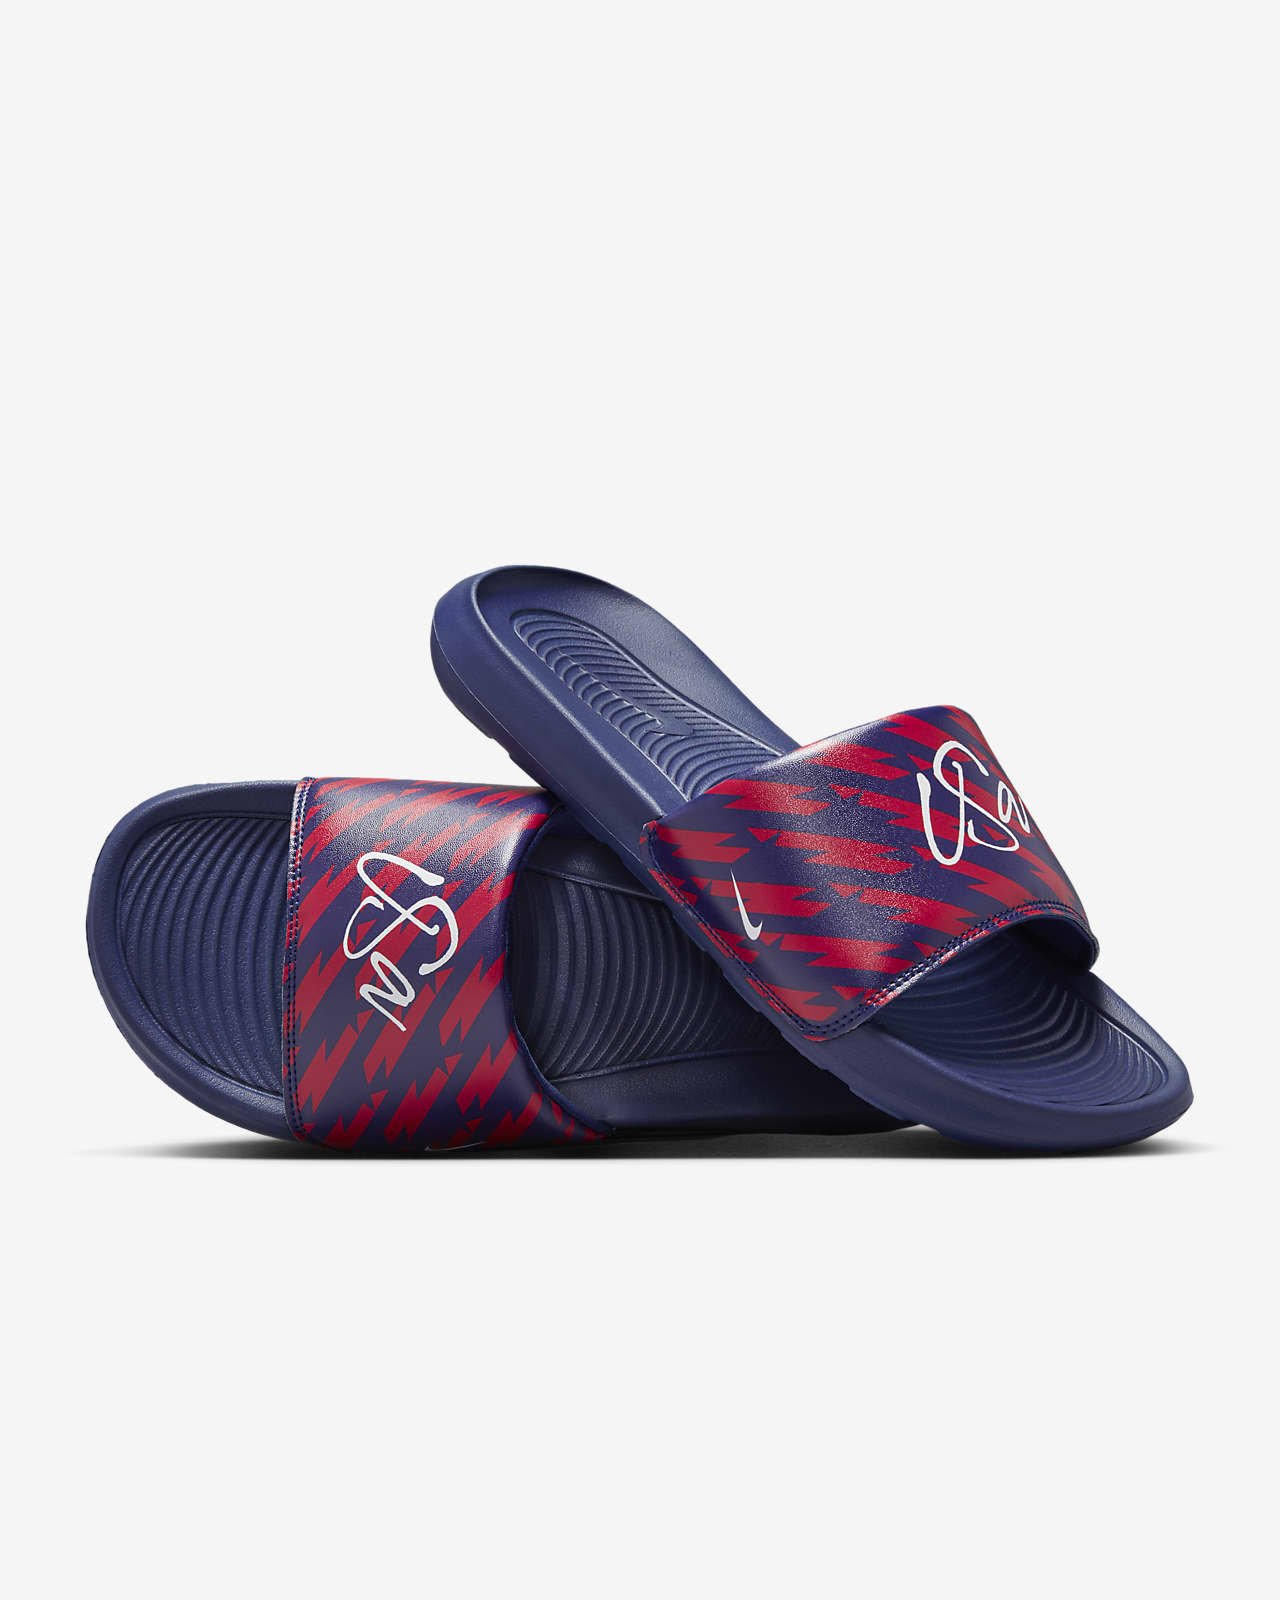 These Flip-Flop House Slippers Are 50% Off at